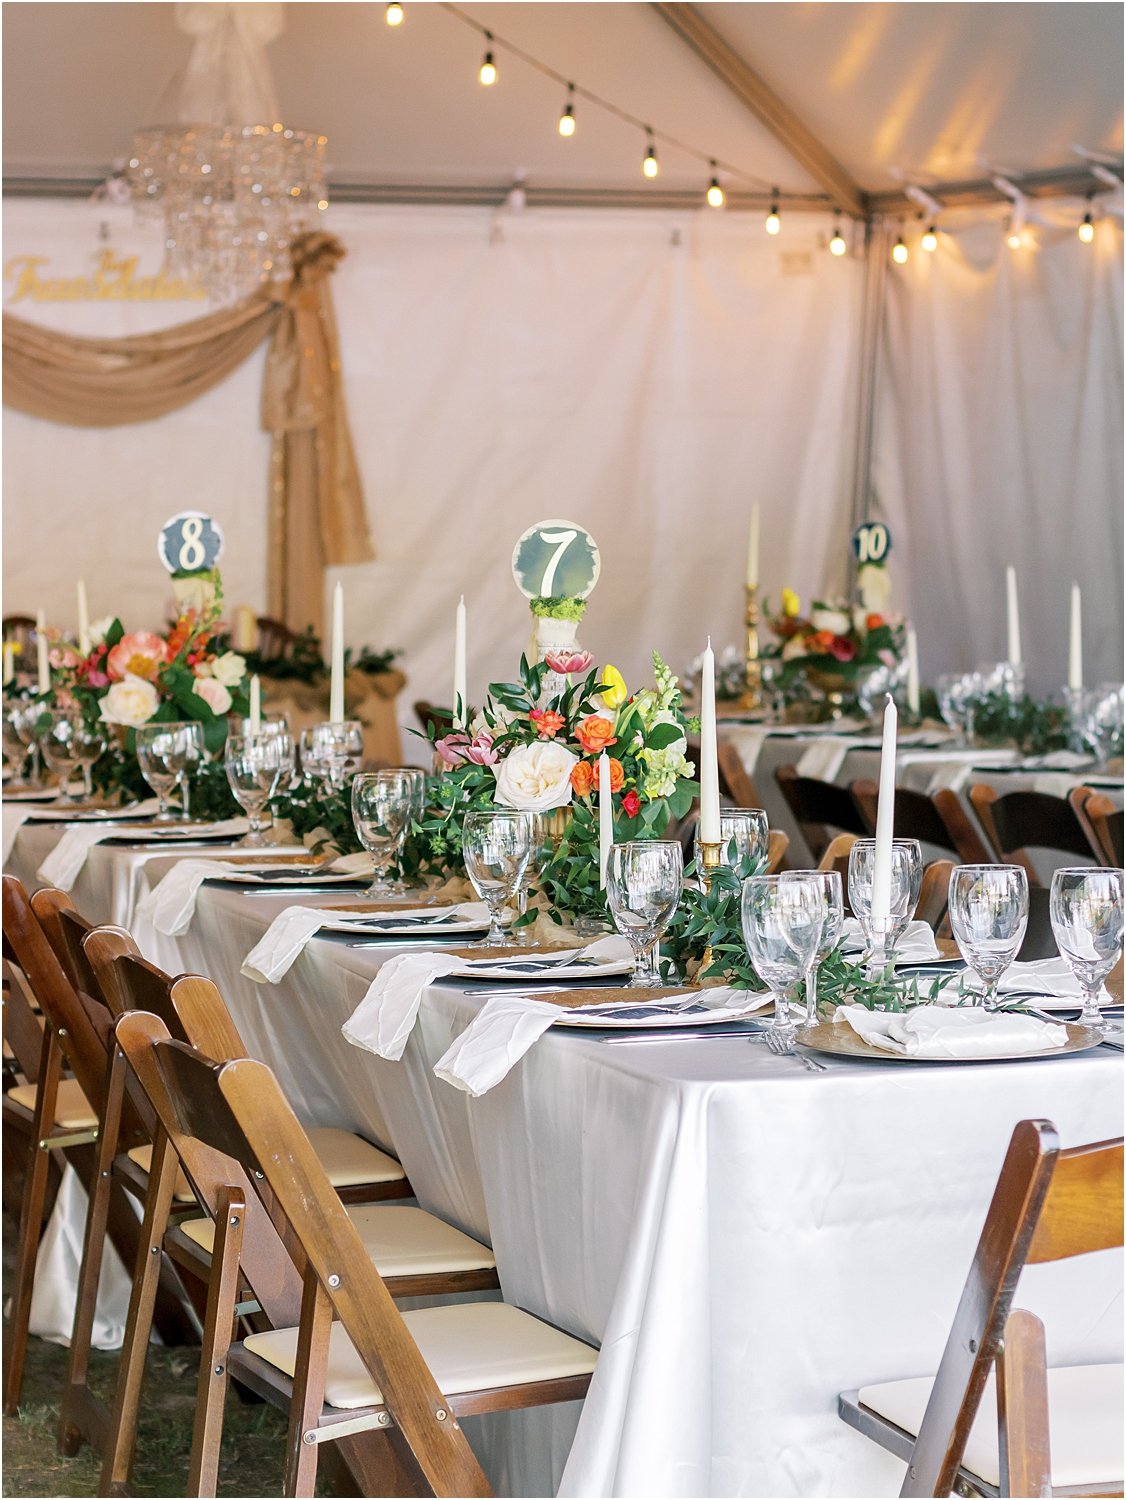 Summer pops of color wedding table decor